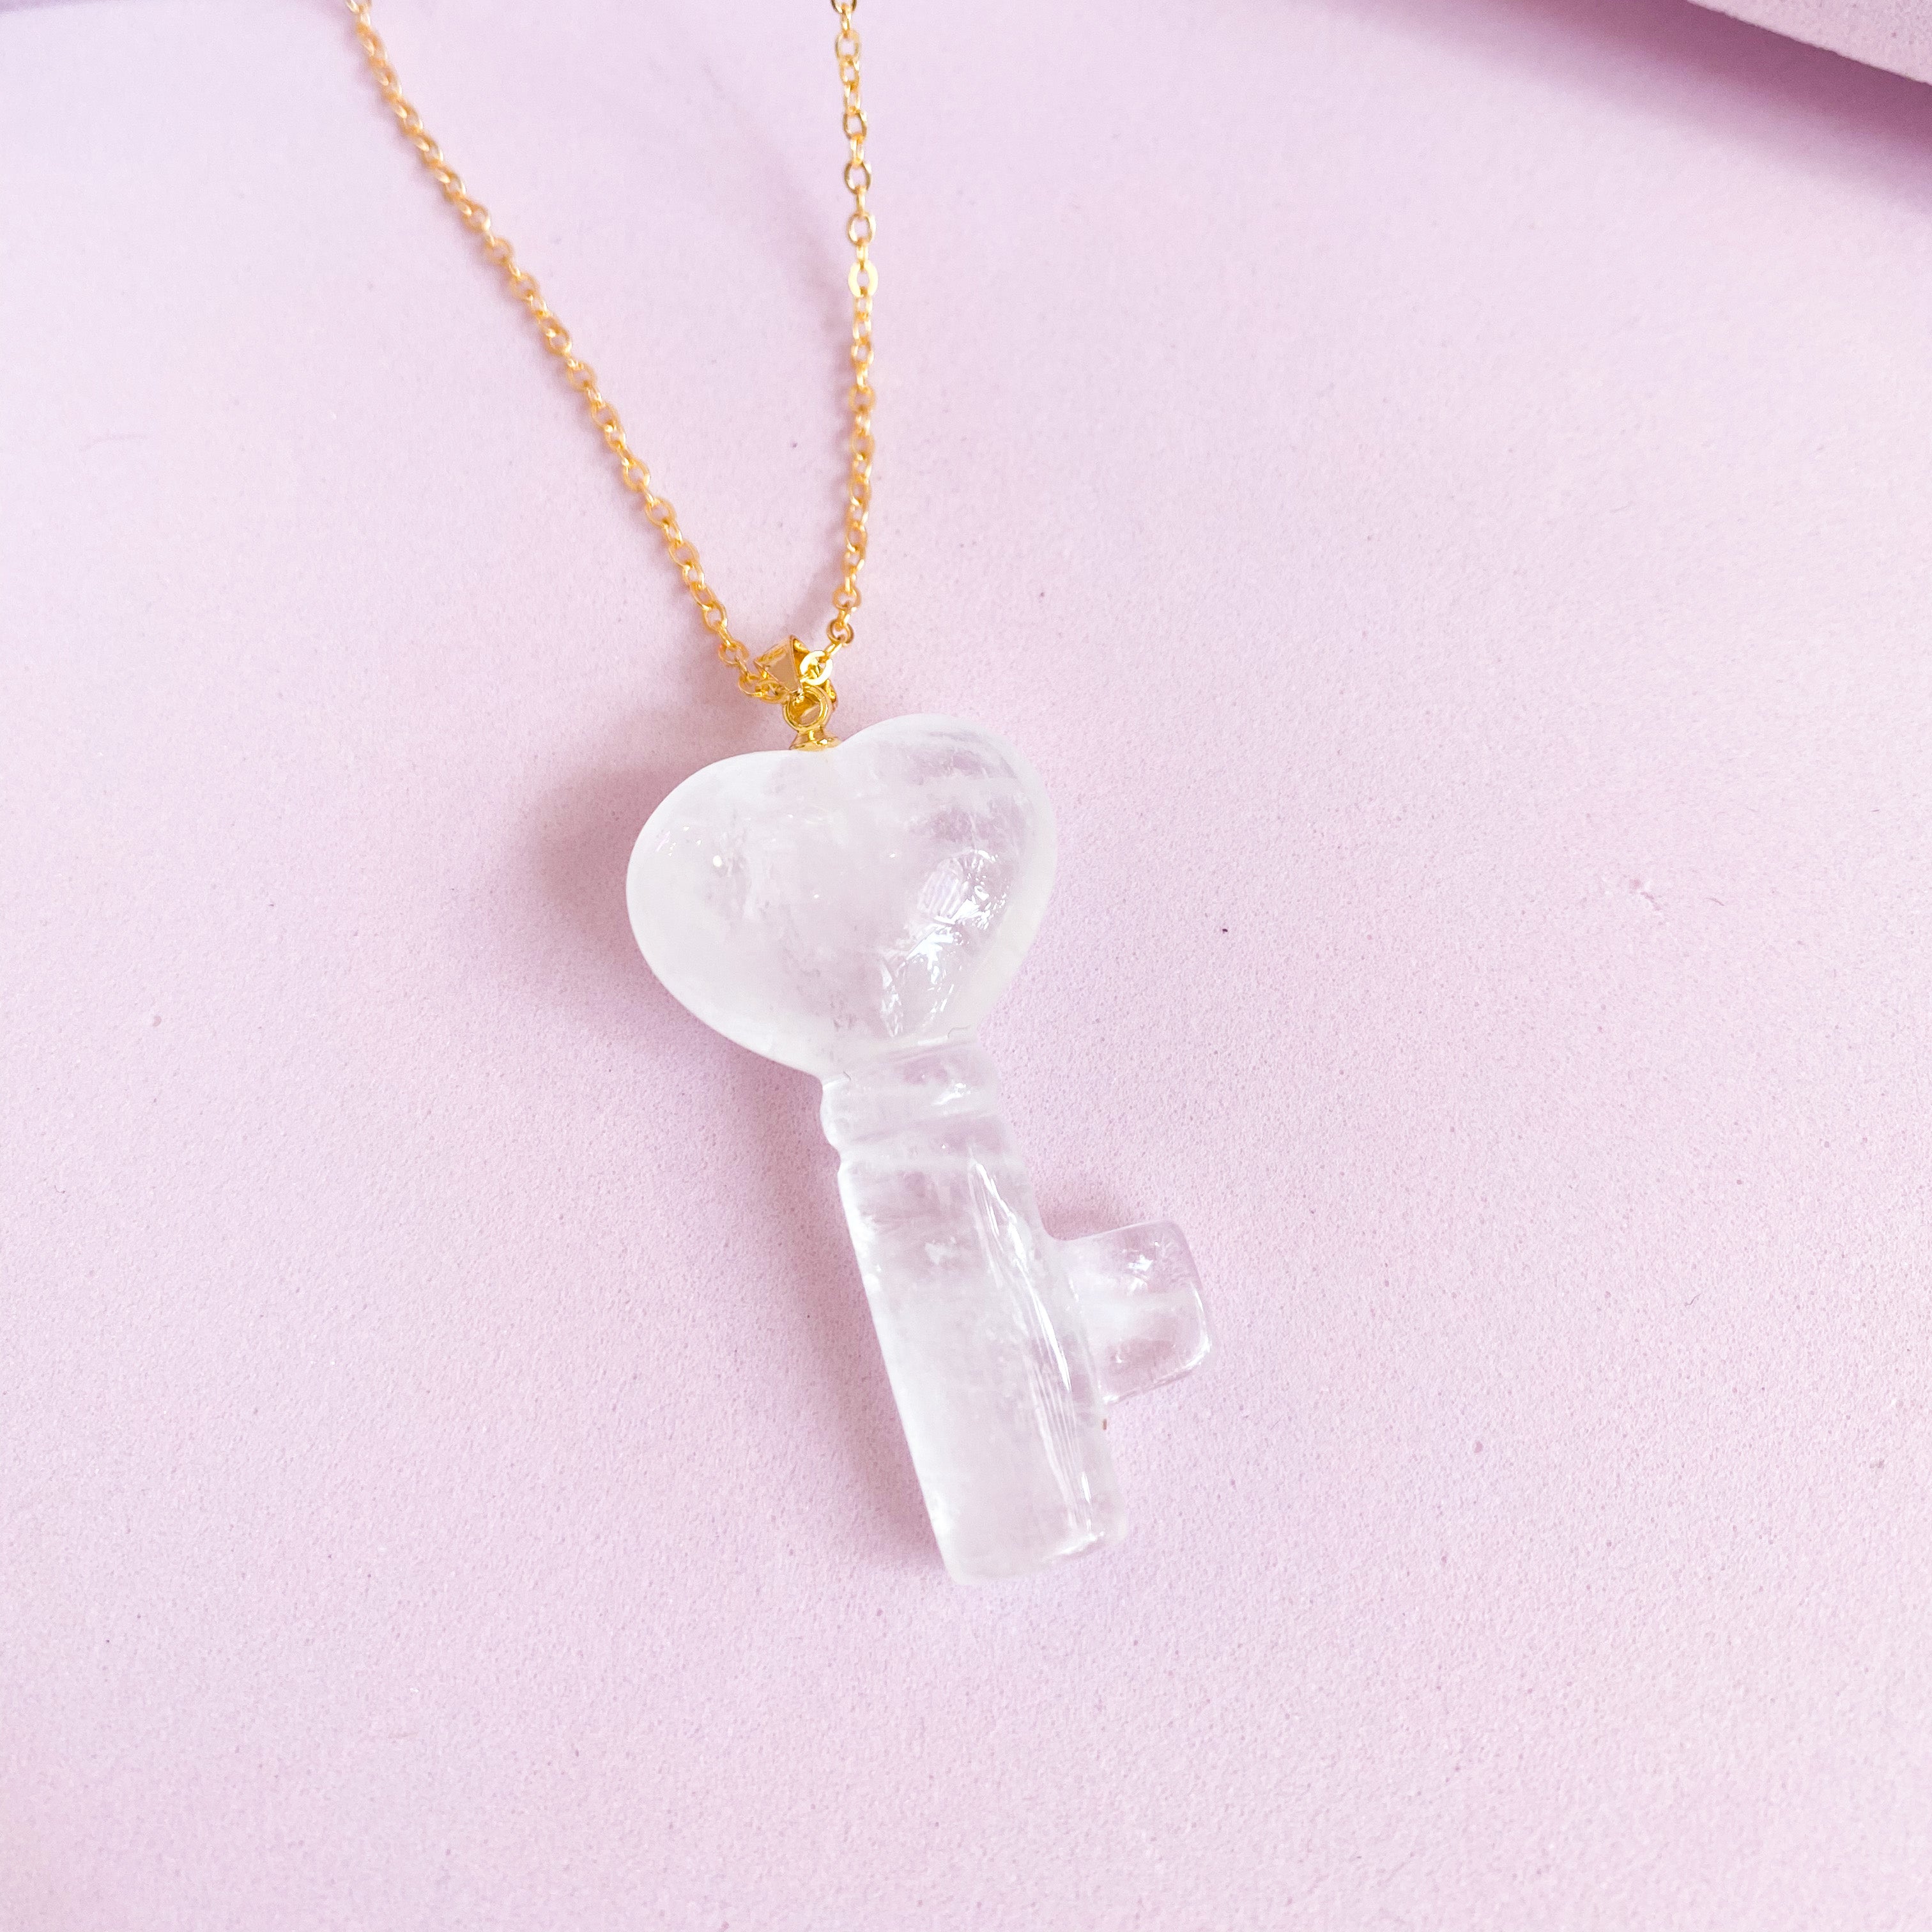 Clear Quartz Crystal Key Necklace with gold chain